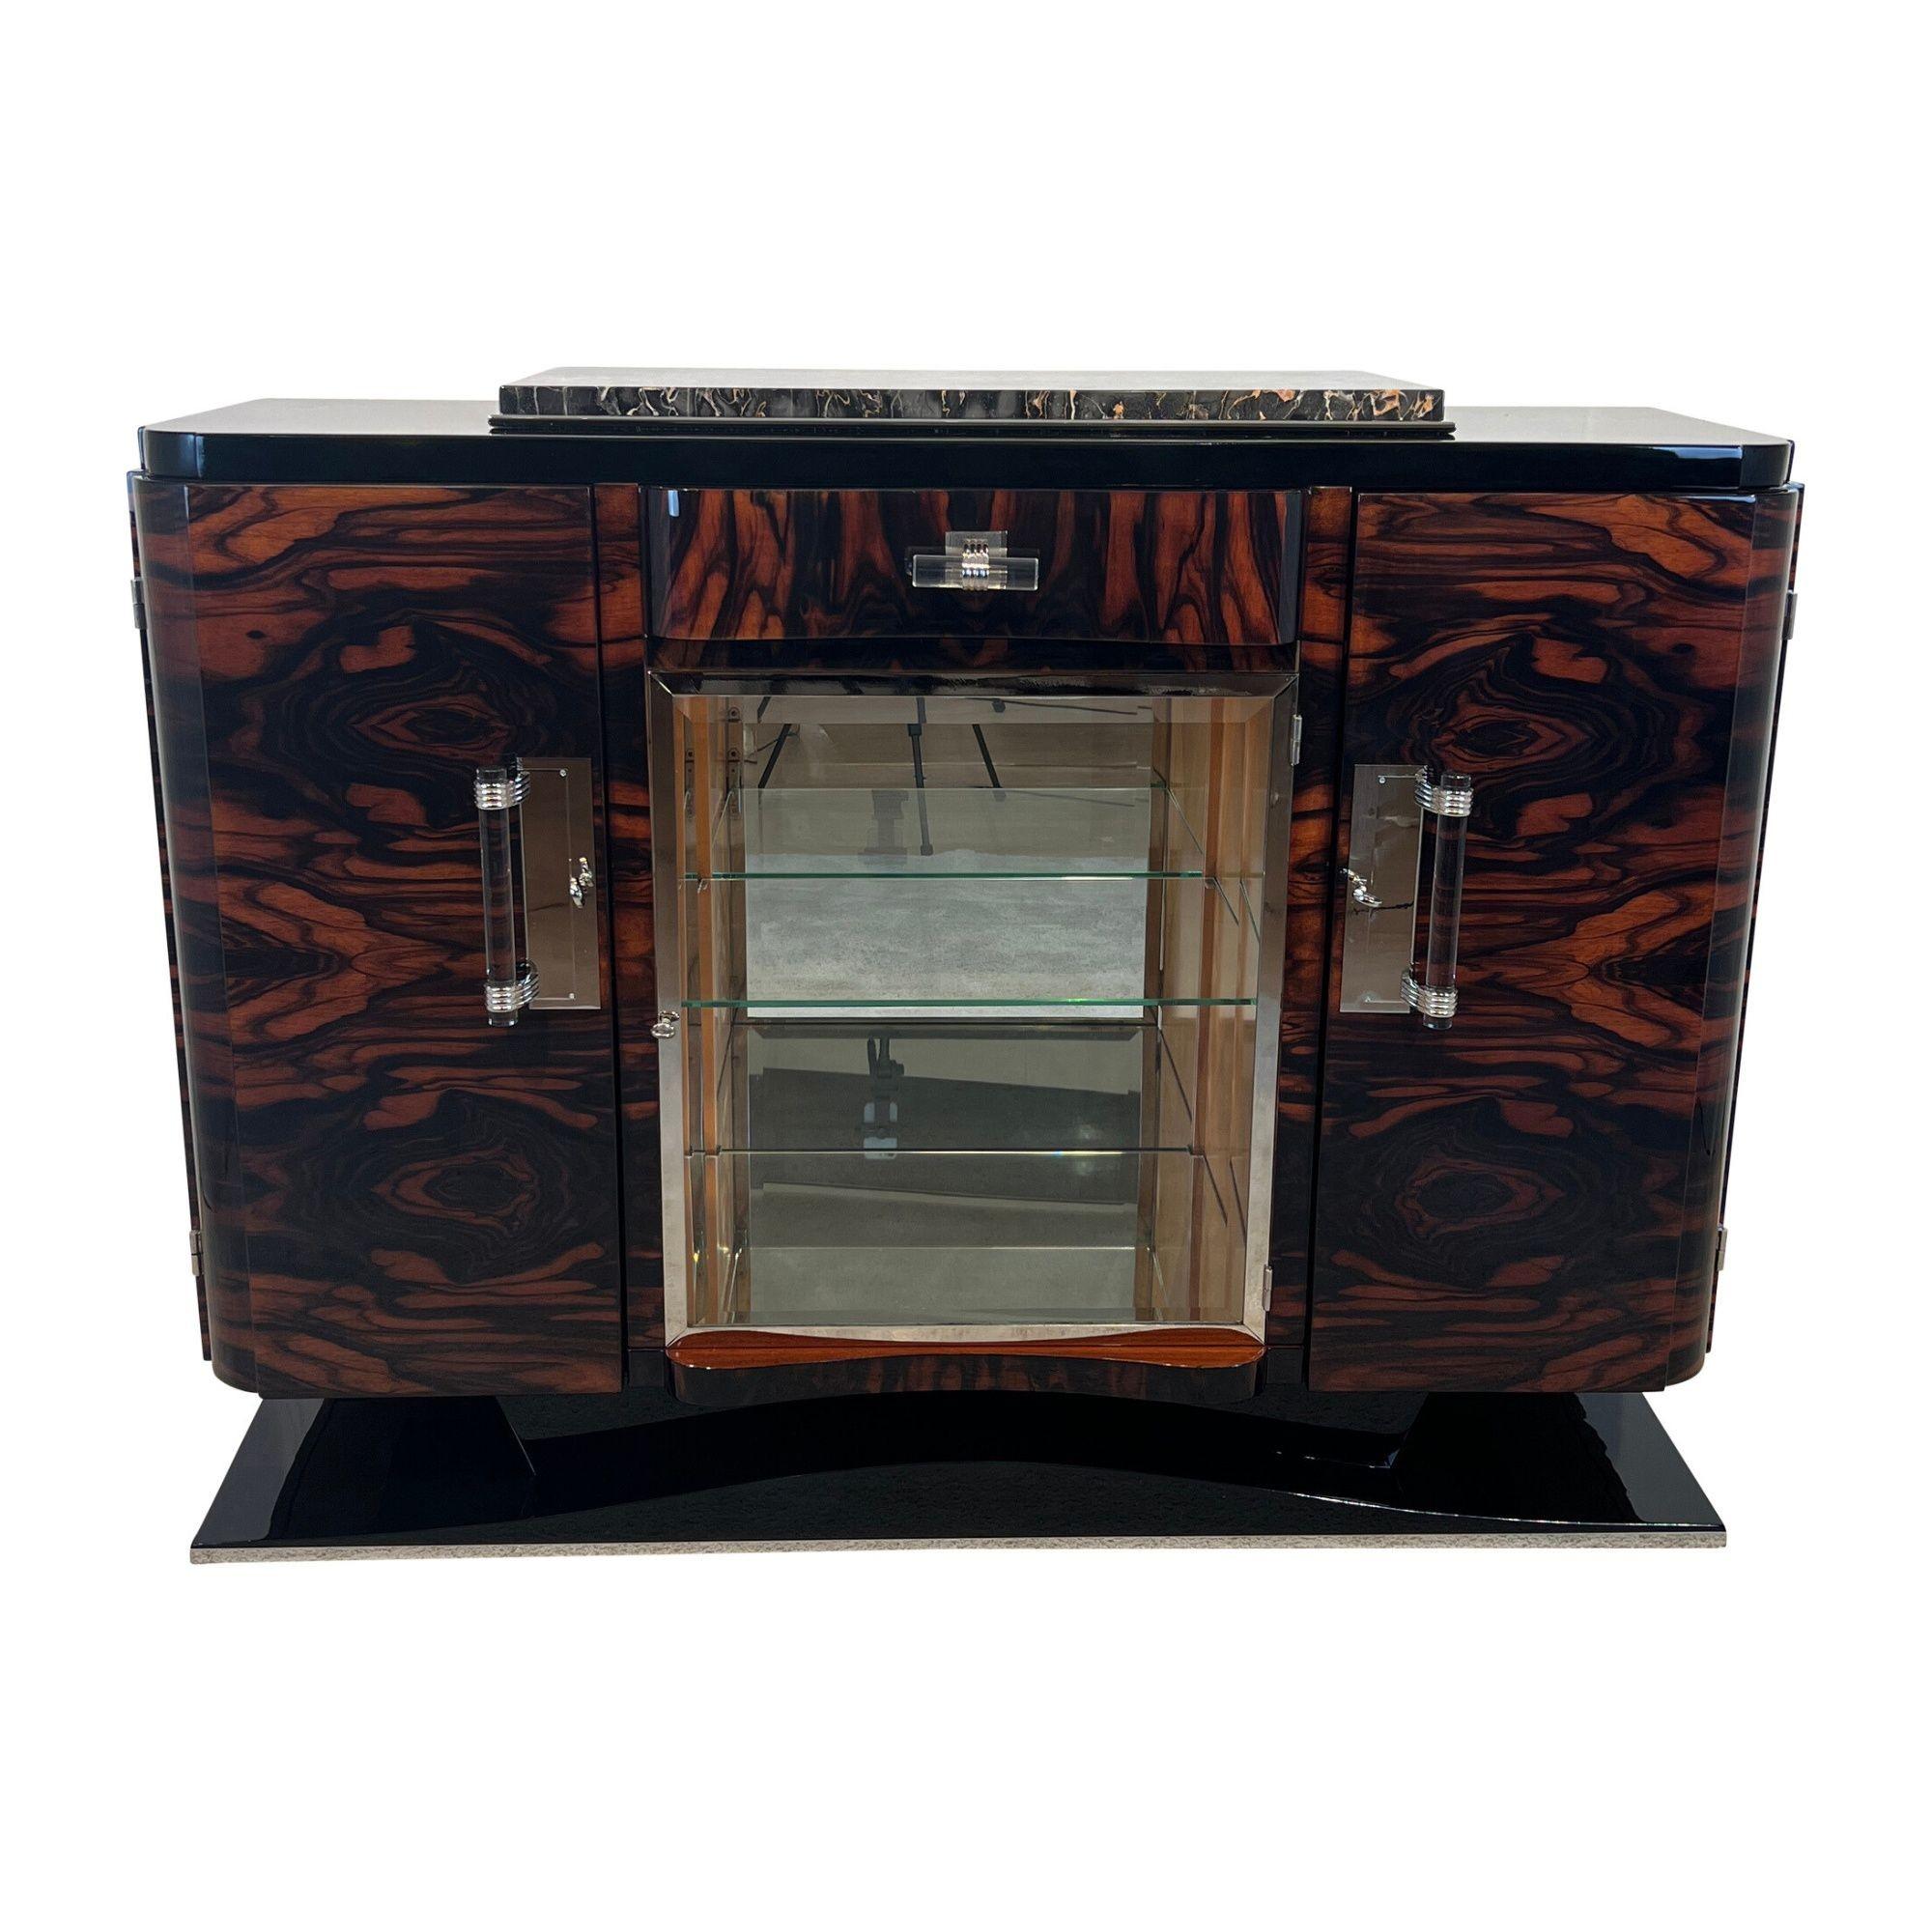 Elegant original french Art Deco Sideboard from around 1930 in excellently restored condition.
Beautiful Macassar ebony cross-veneered and lacquered. Base and cornice lacquered in a perfect high-gloss black.
Lovely original nickel-plated fittings